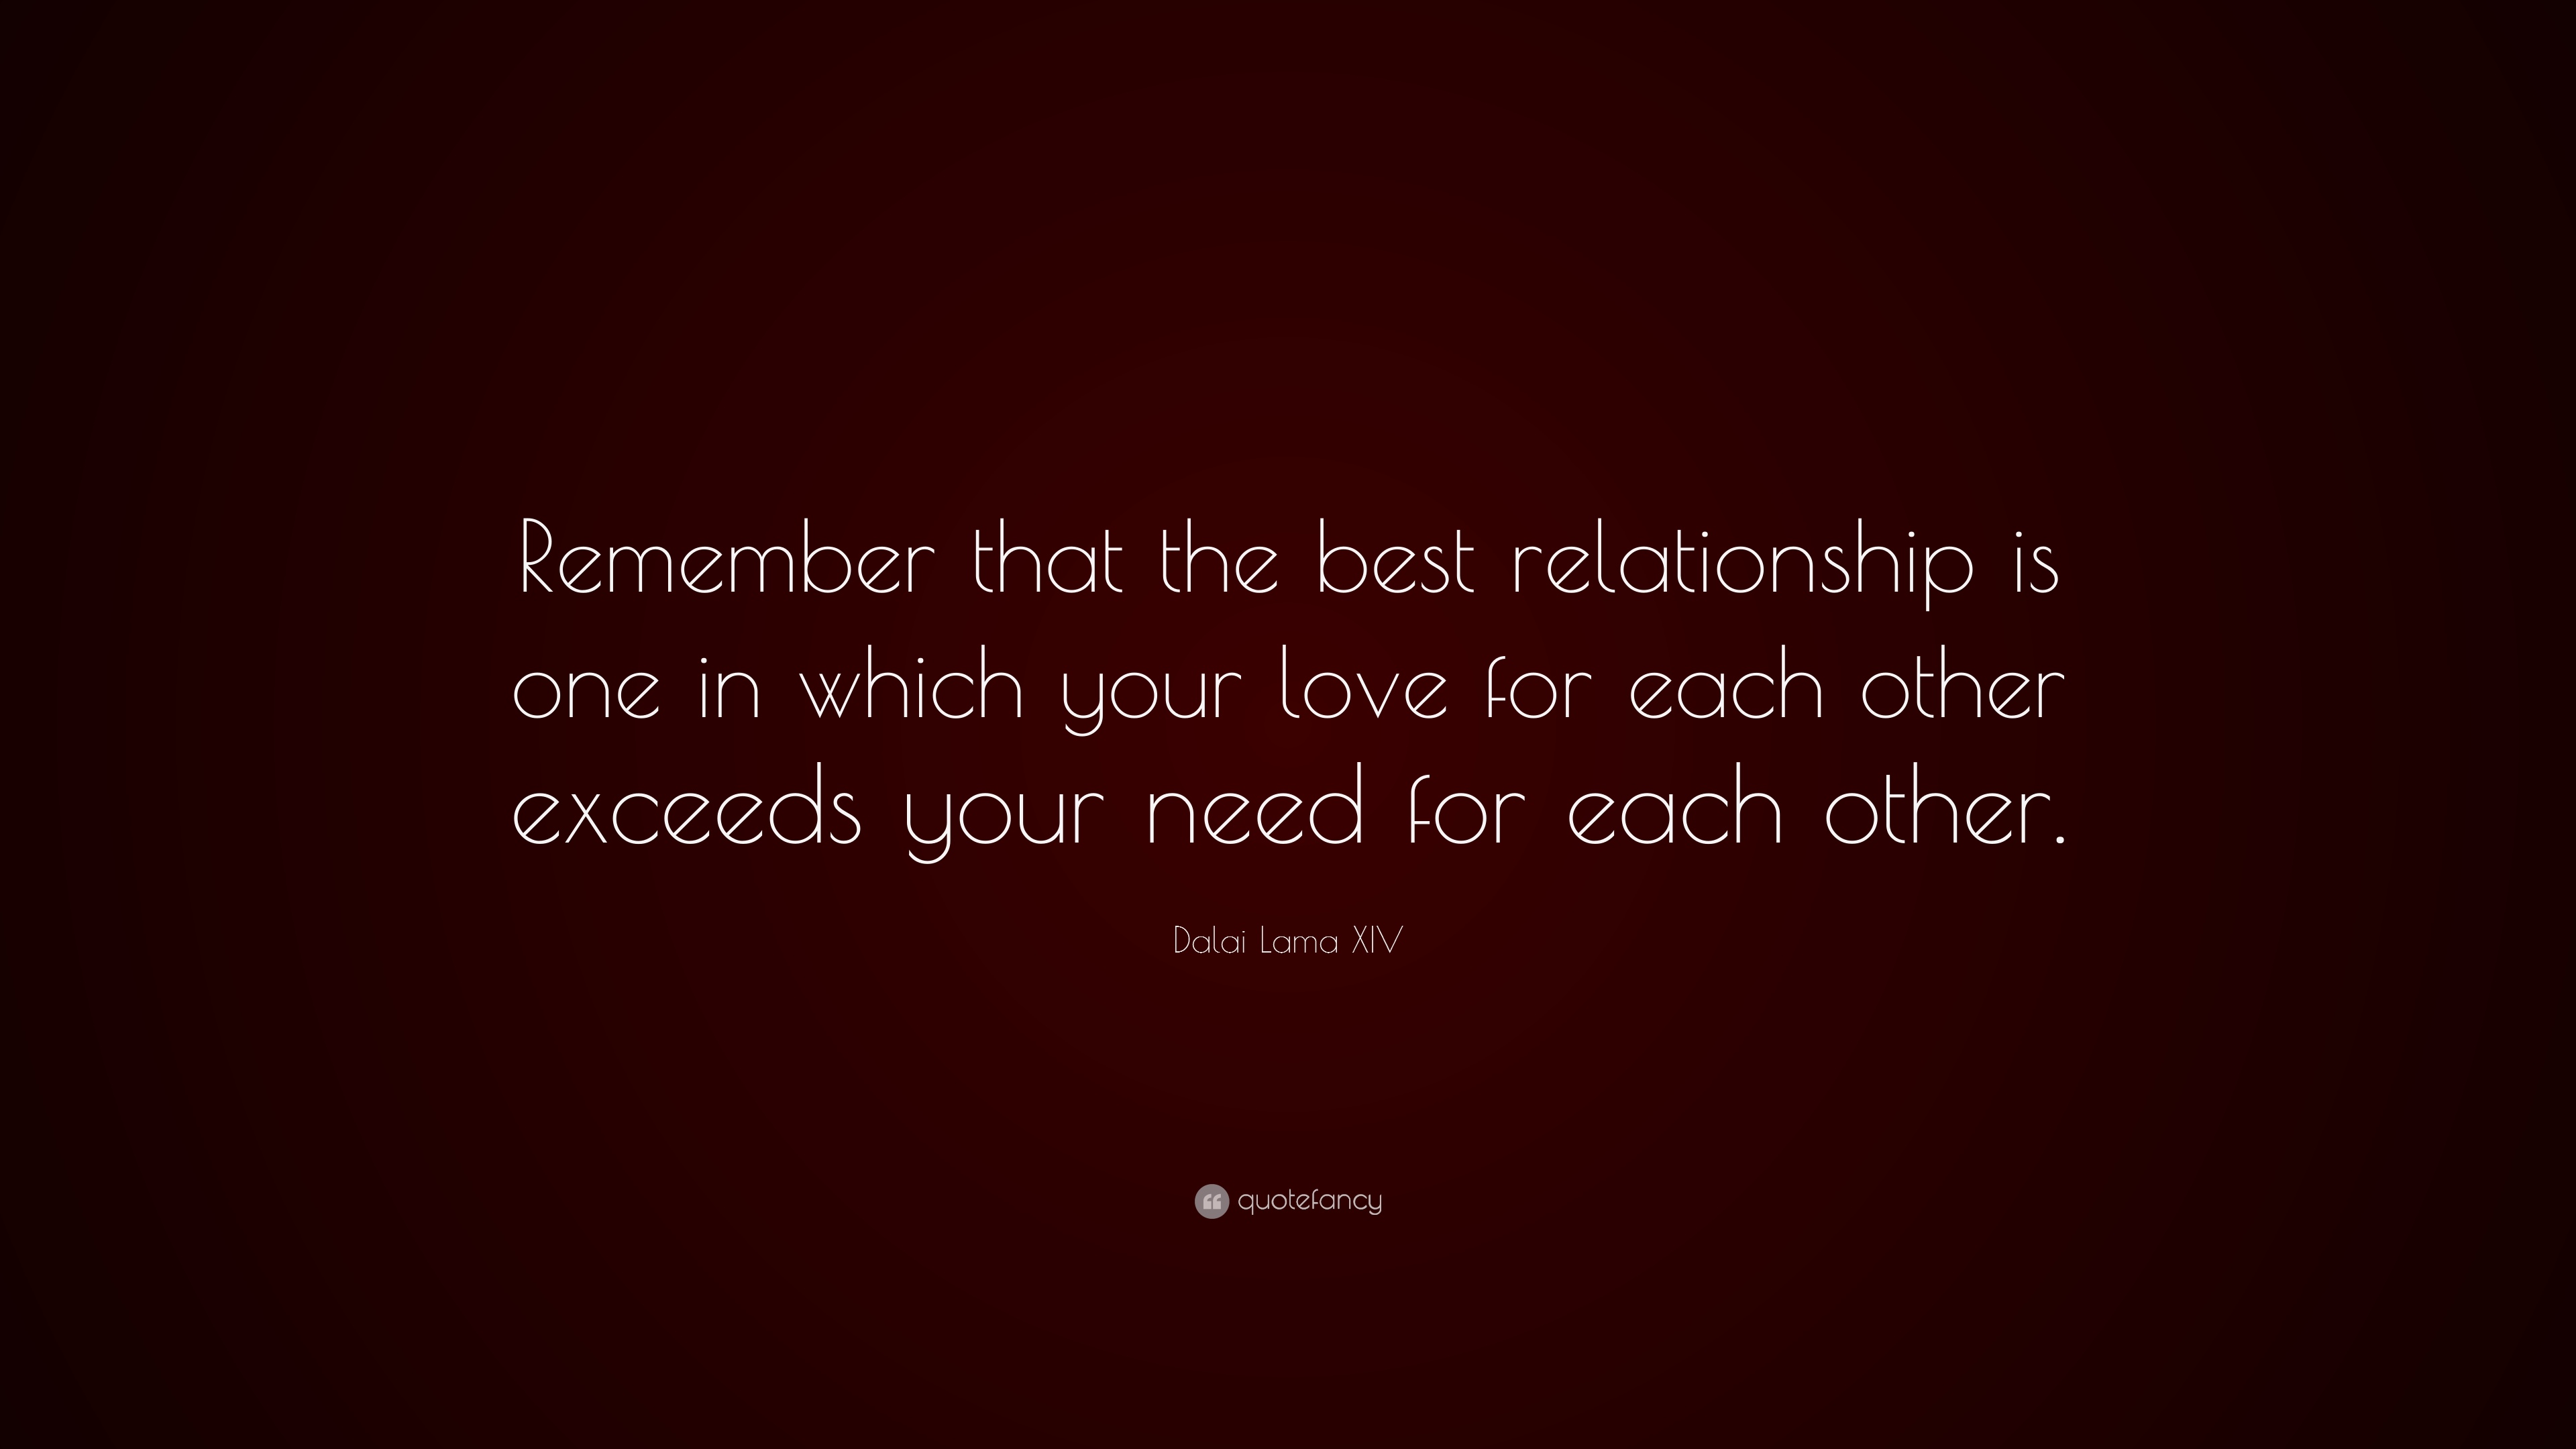 Remember that the best relationship is one in which your love for each other exceeds your need for each other. Dalai Lama XIV